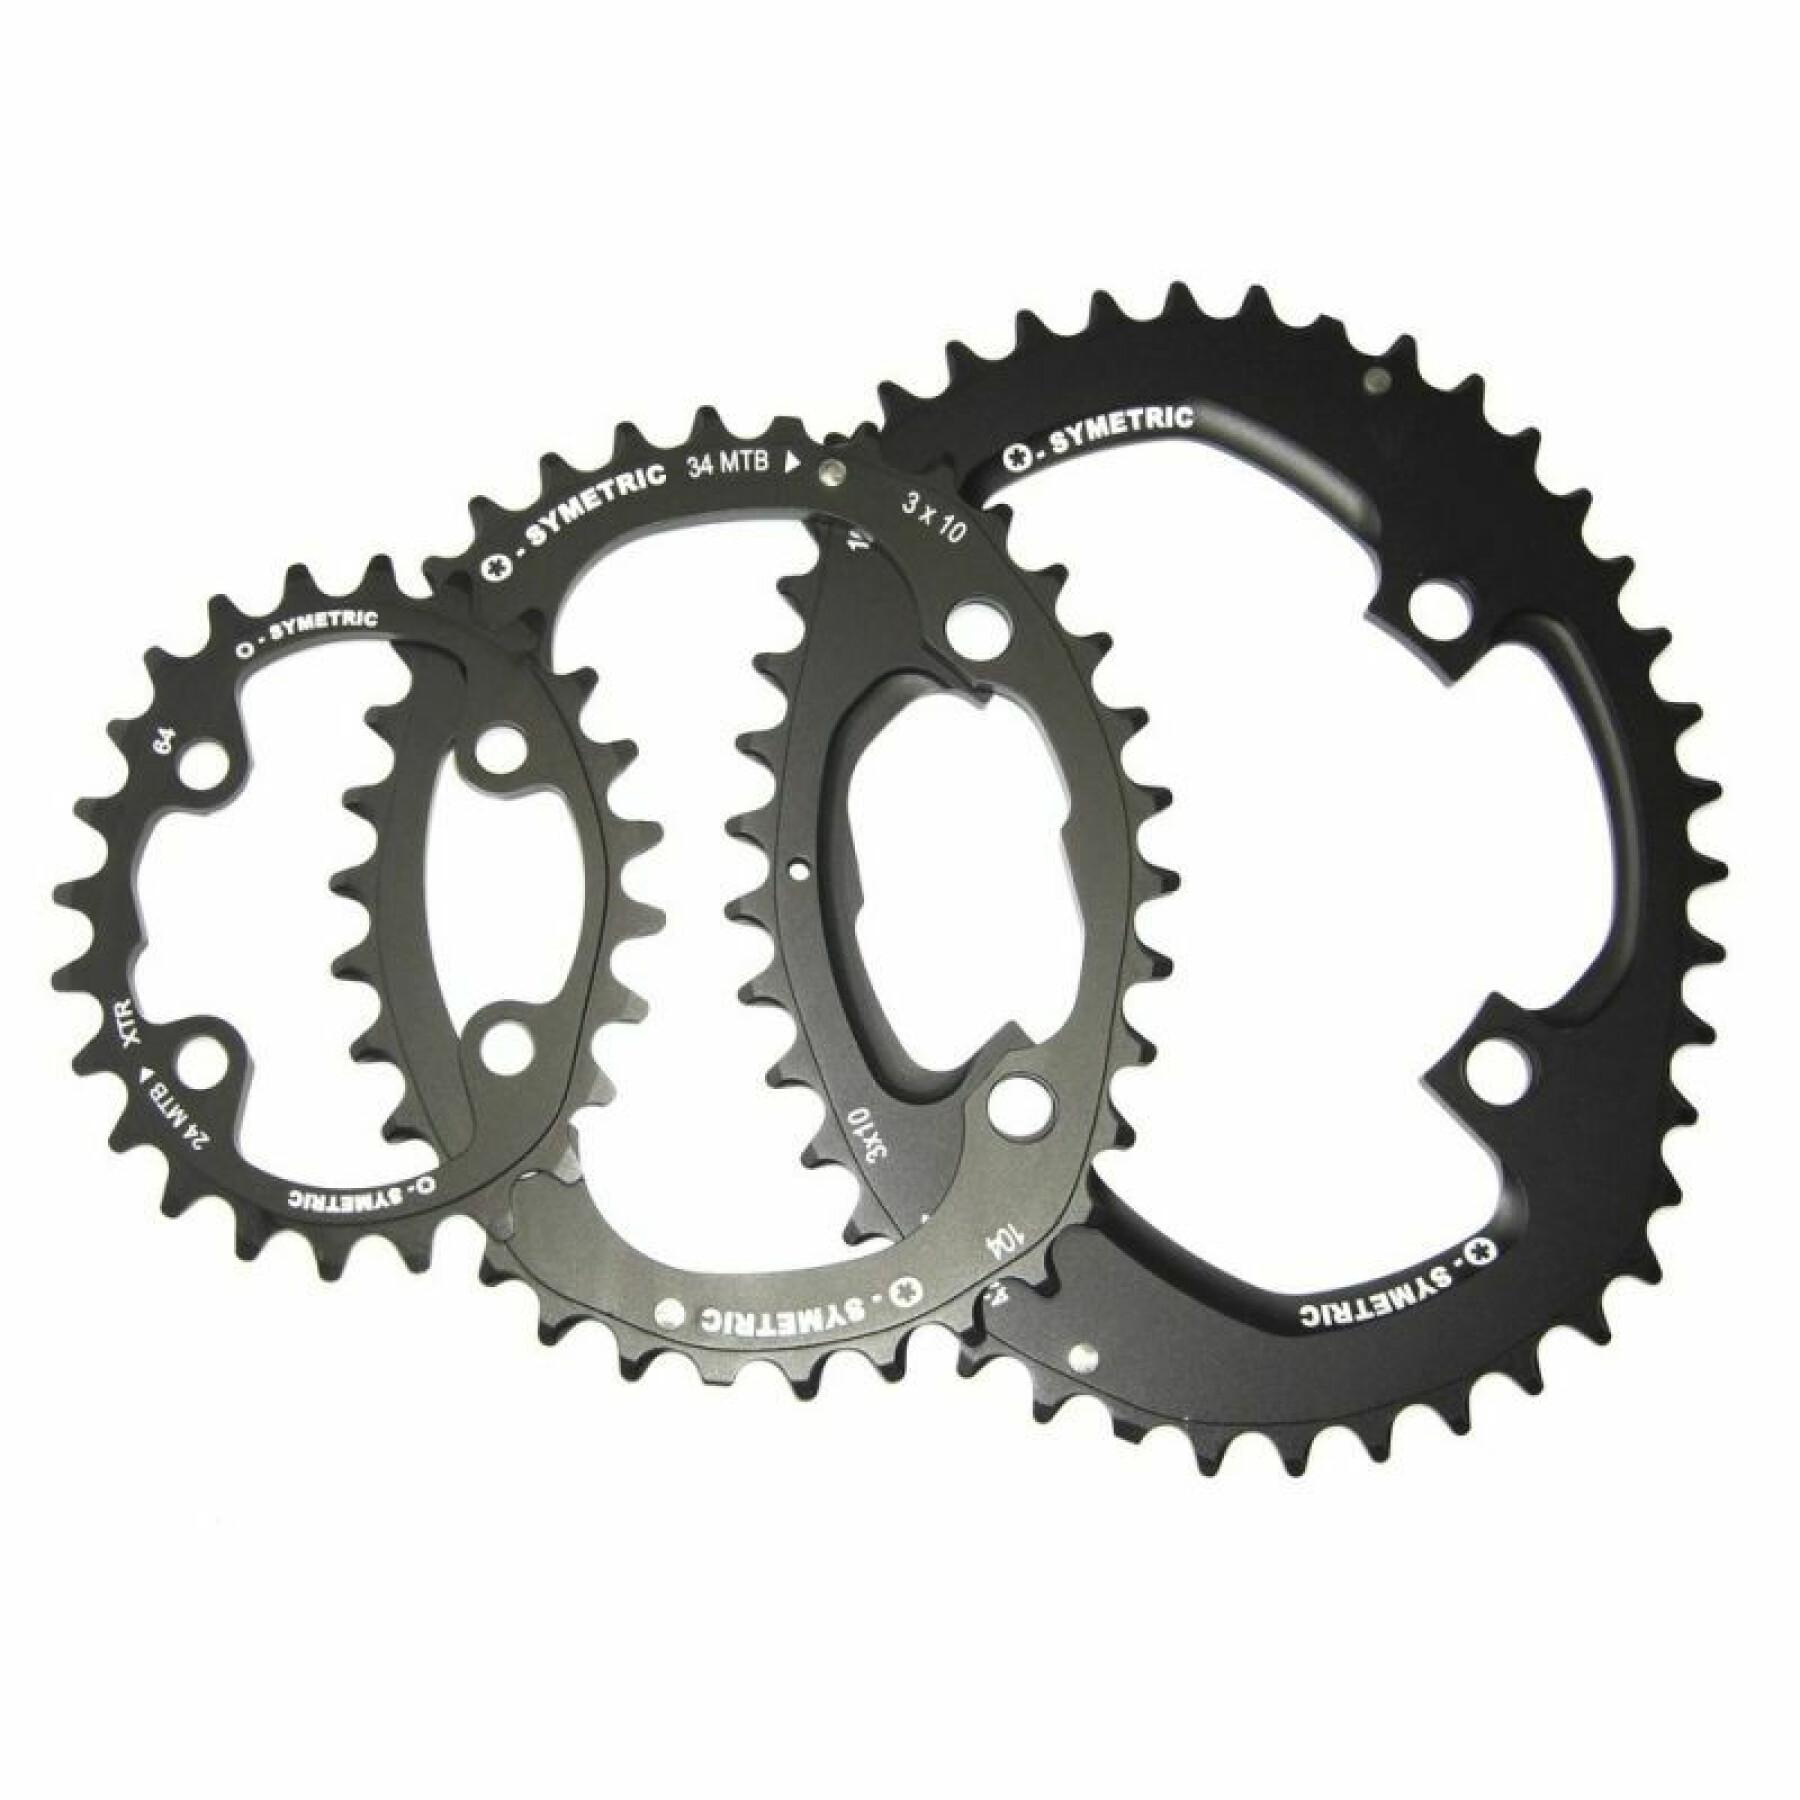 bandejas osymetric mtb Stronglight 104/64 bcd 24-34-42T